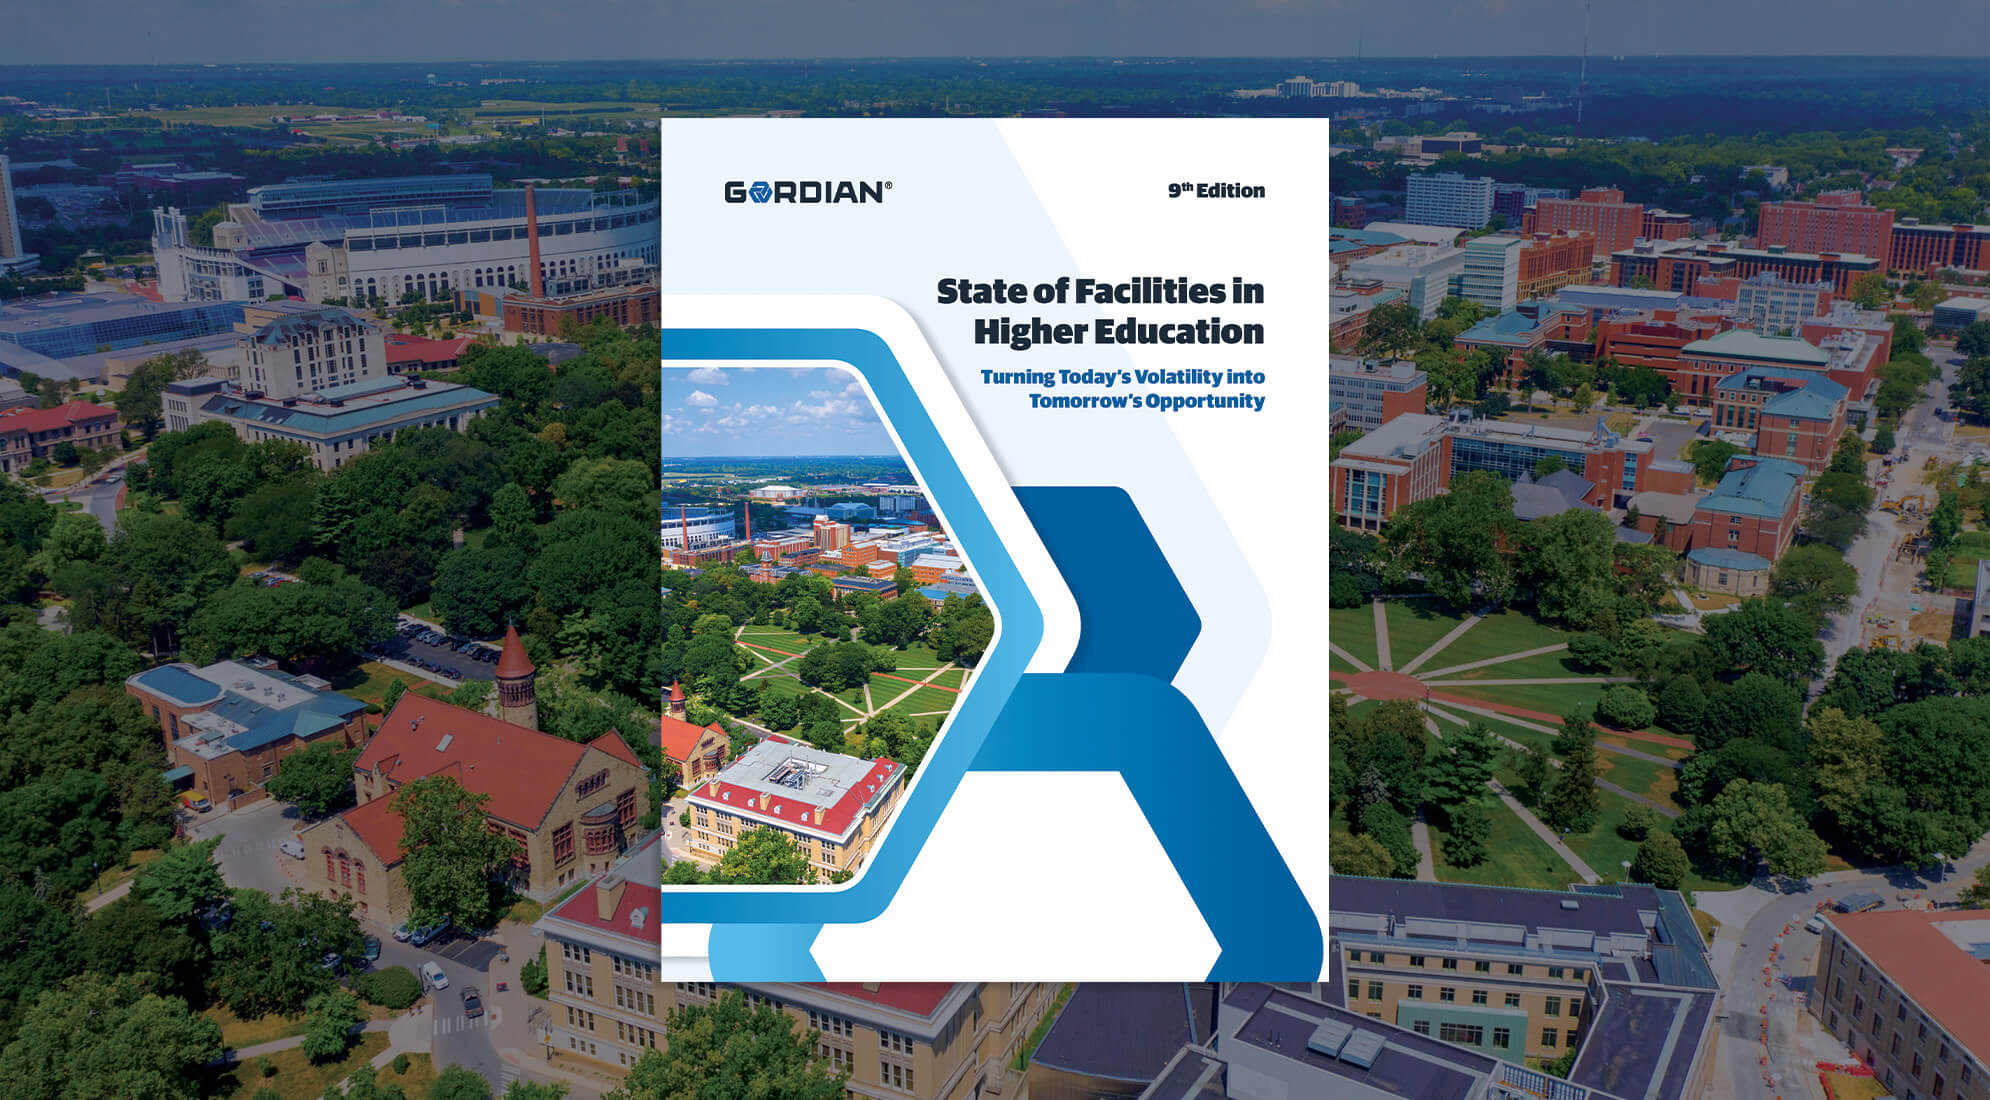 The State of Facilities in Higher Education, 9th Edition 2